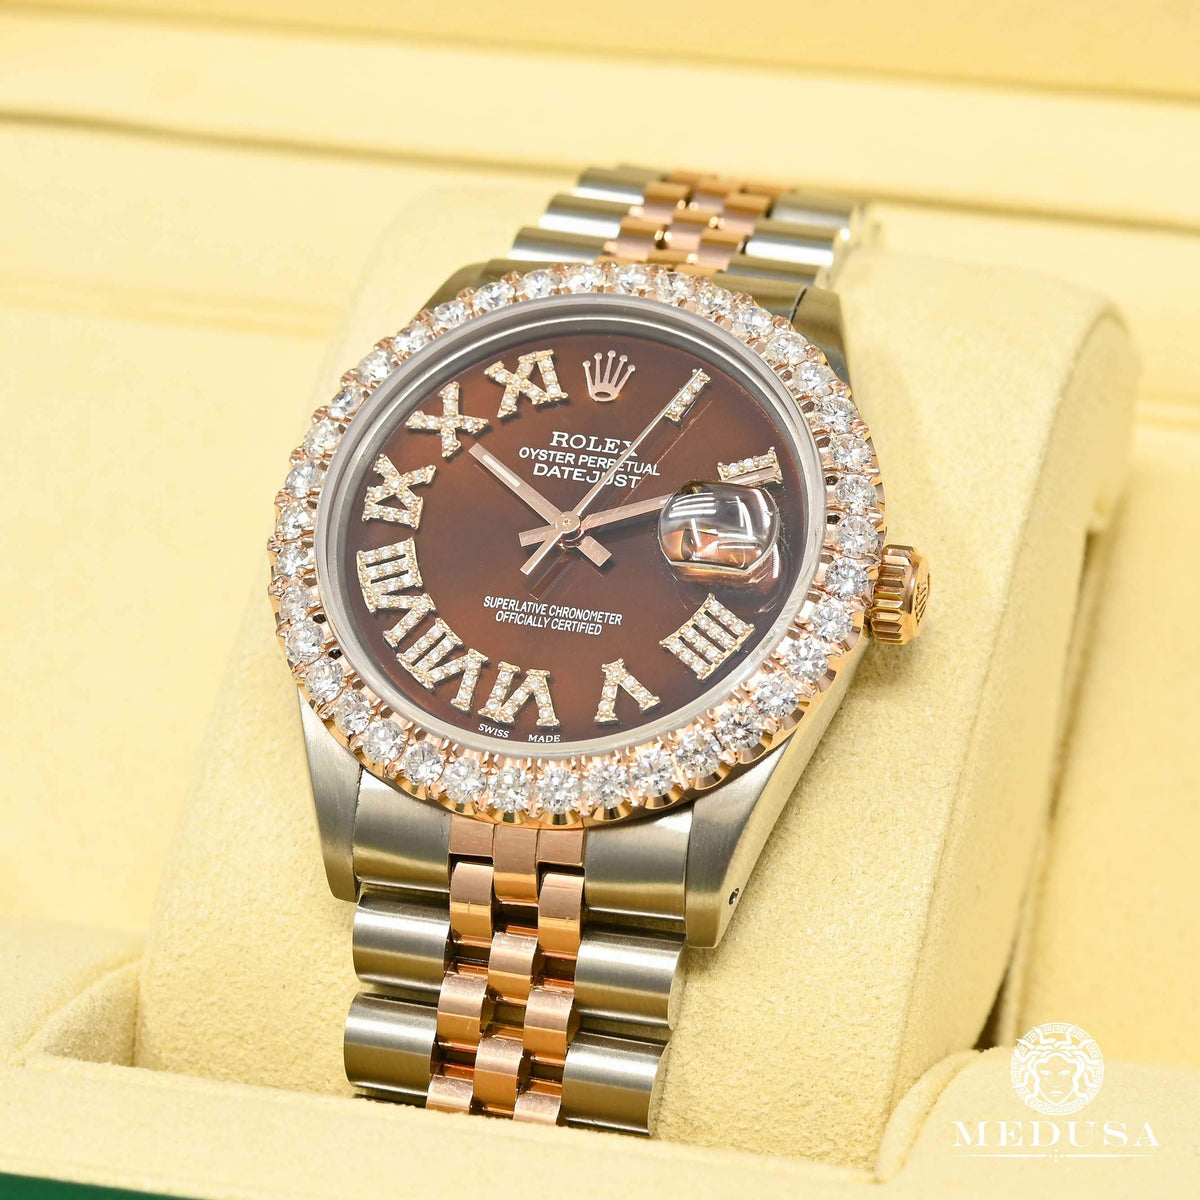 Montre Rolex | Montre Homme Datejust 36mm - Rose 2 Tons Chocolate Or Rose 2 Tons